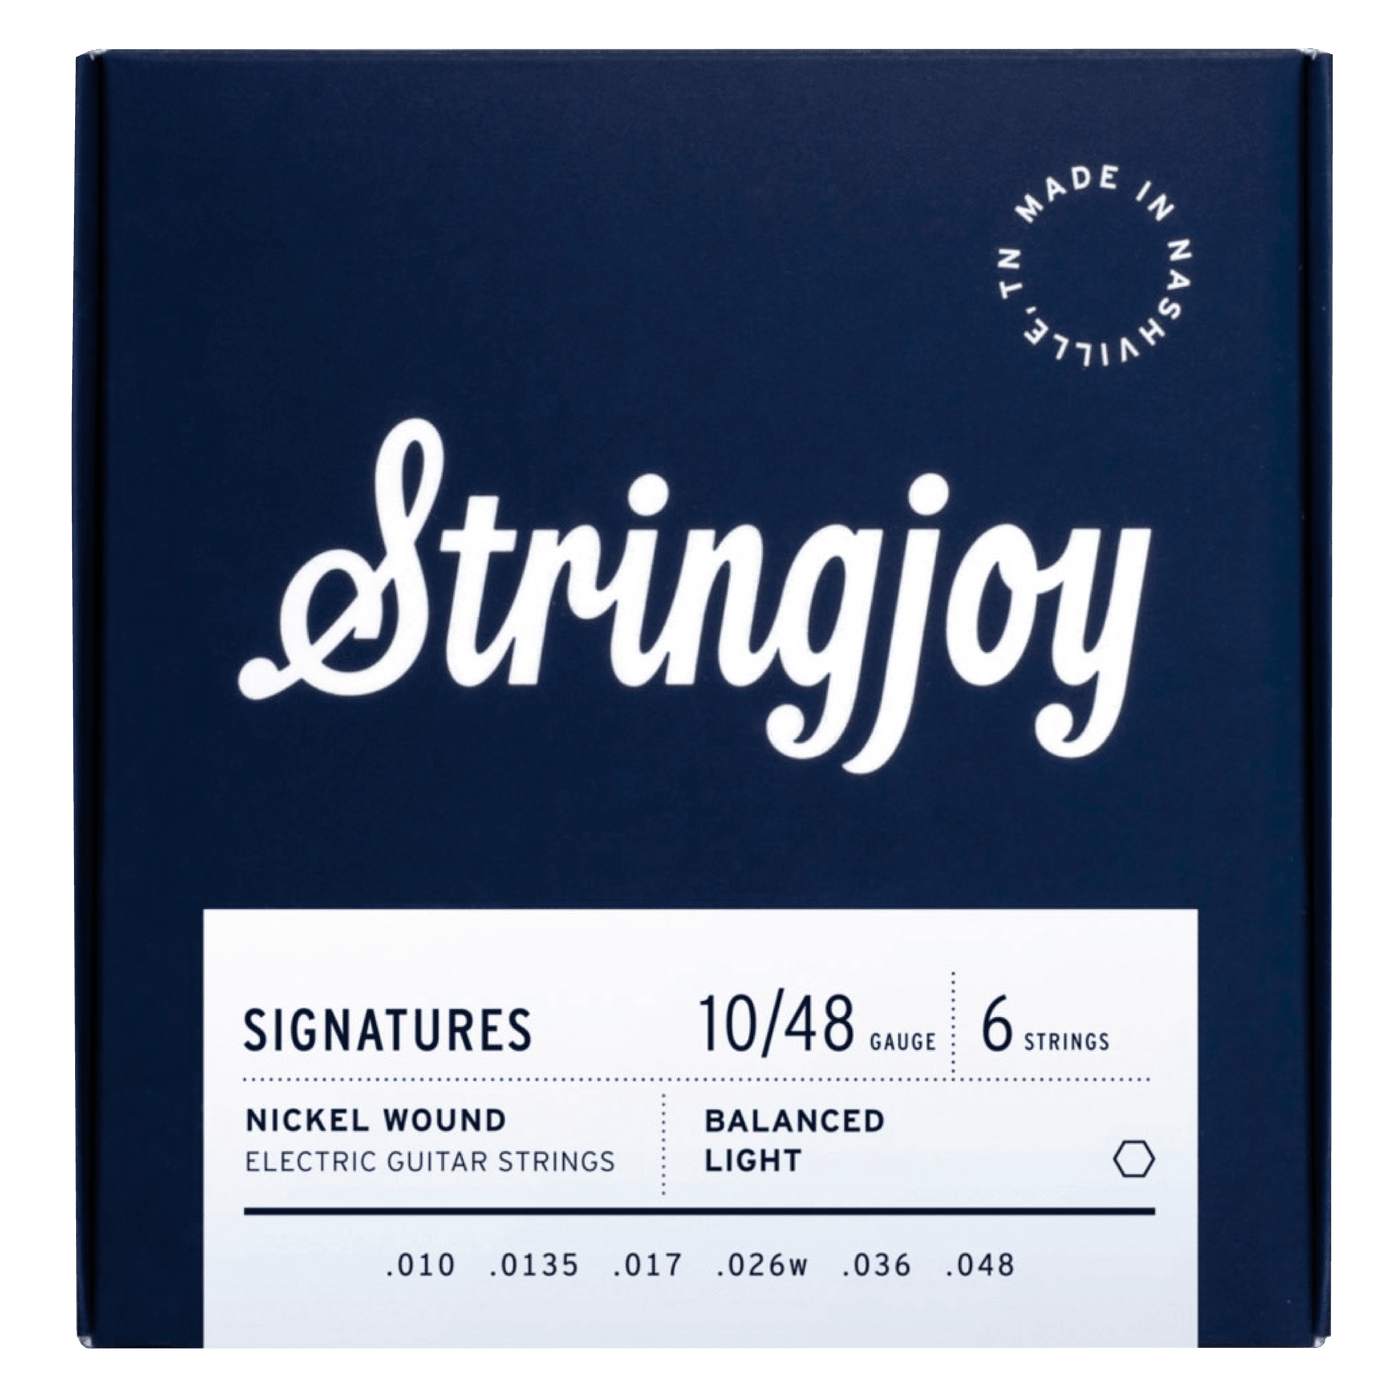 Stringjoy - Light (10-48) - $19990 - Gearhub - I know what you’re thinking: 10 to 48? I thought Light strings went 10 to 46? Yeah well, let me explain…We do a lot of experimenting around here with different string gauges — I know, we’re nerds — and we love to run the tension math to see how certain sets perform. Through all that, we’ve discovered two inherent problems in a typical 10-46 “Light” set: there are big dips in tension on both the 2nd and 6th strings (.013 and .046, respectively). So, with our Bal